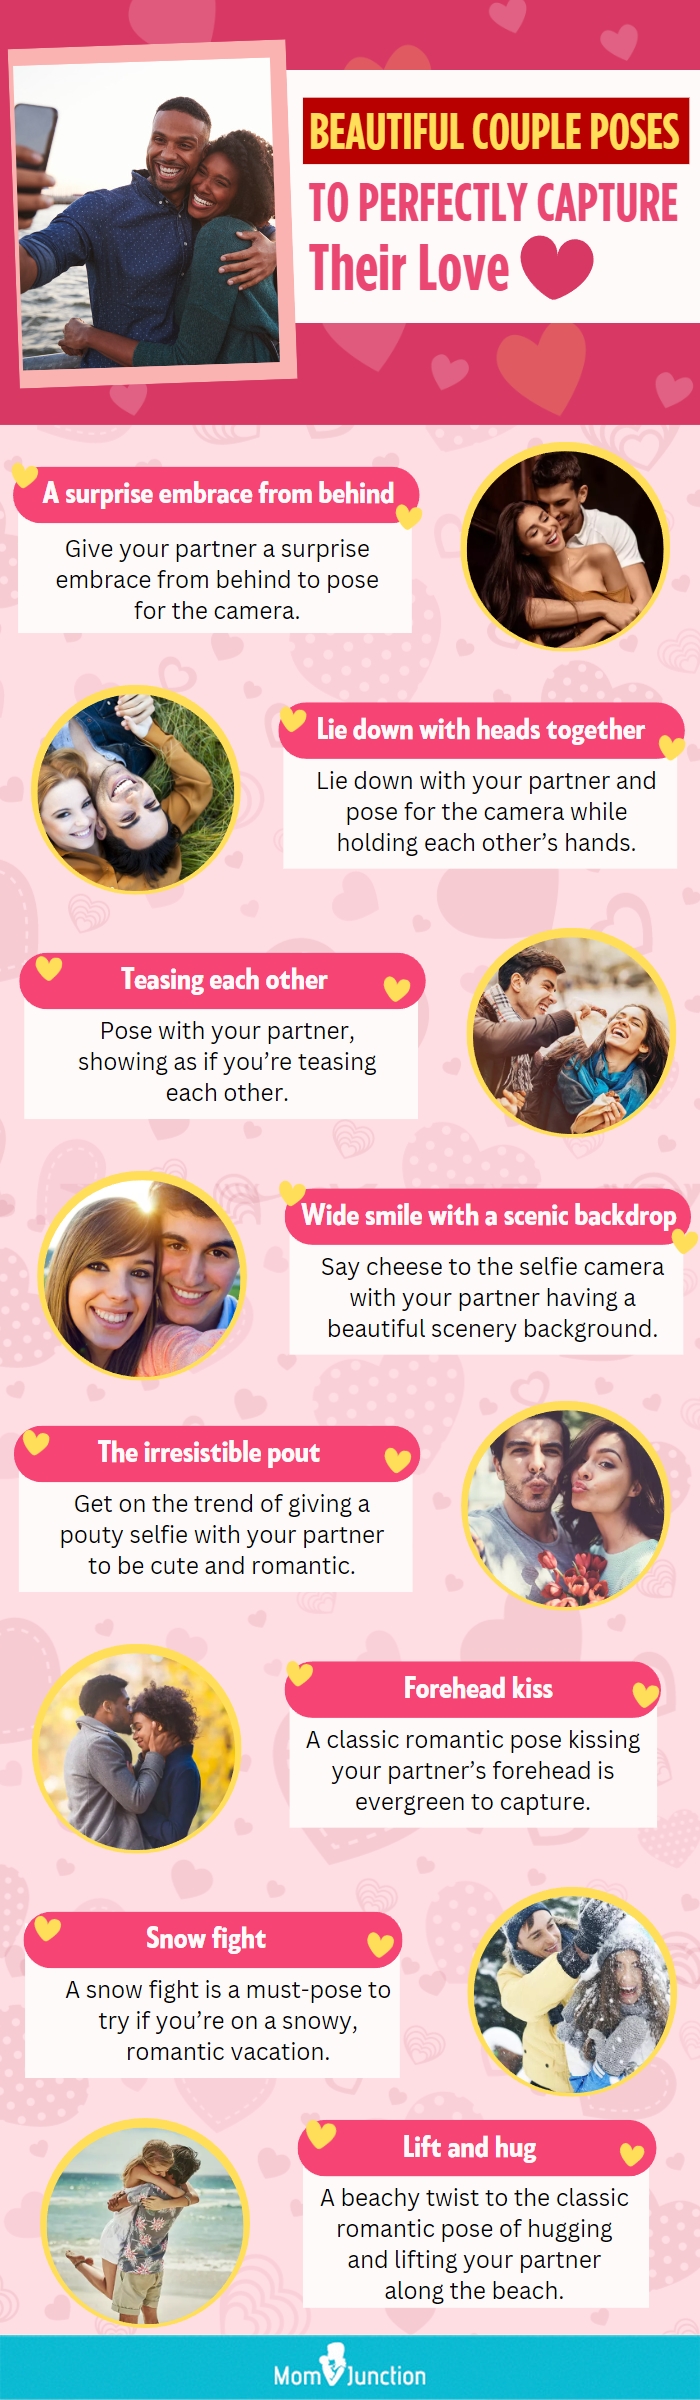 beautiful couple poses to perfectly capture their love (infographic)